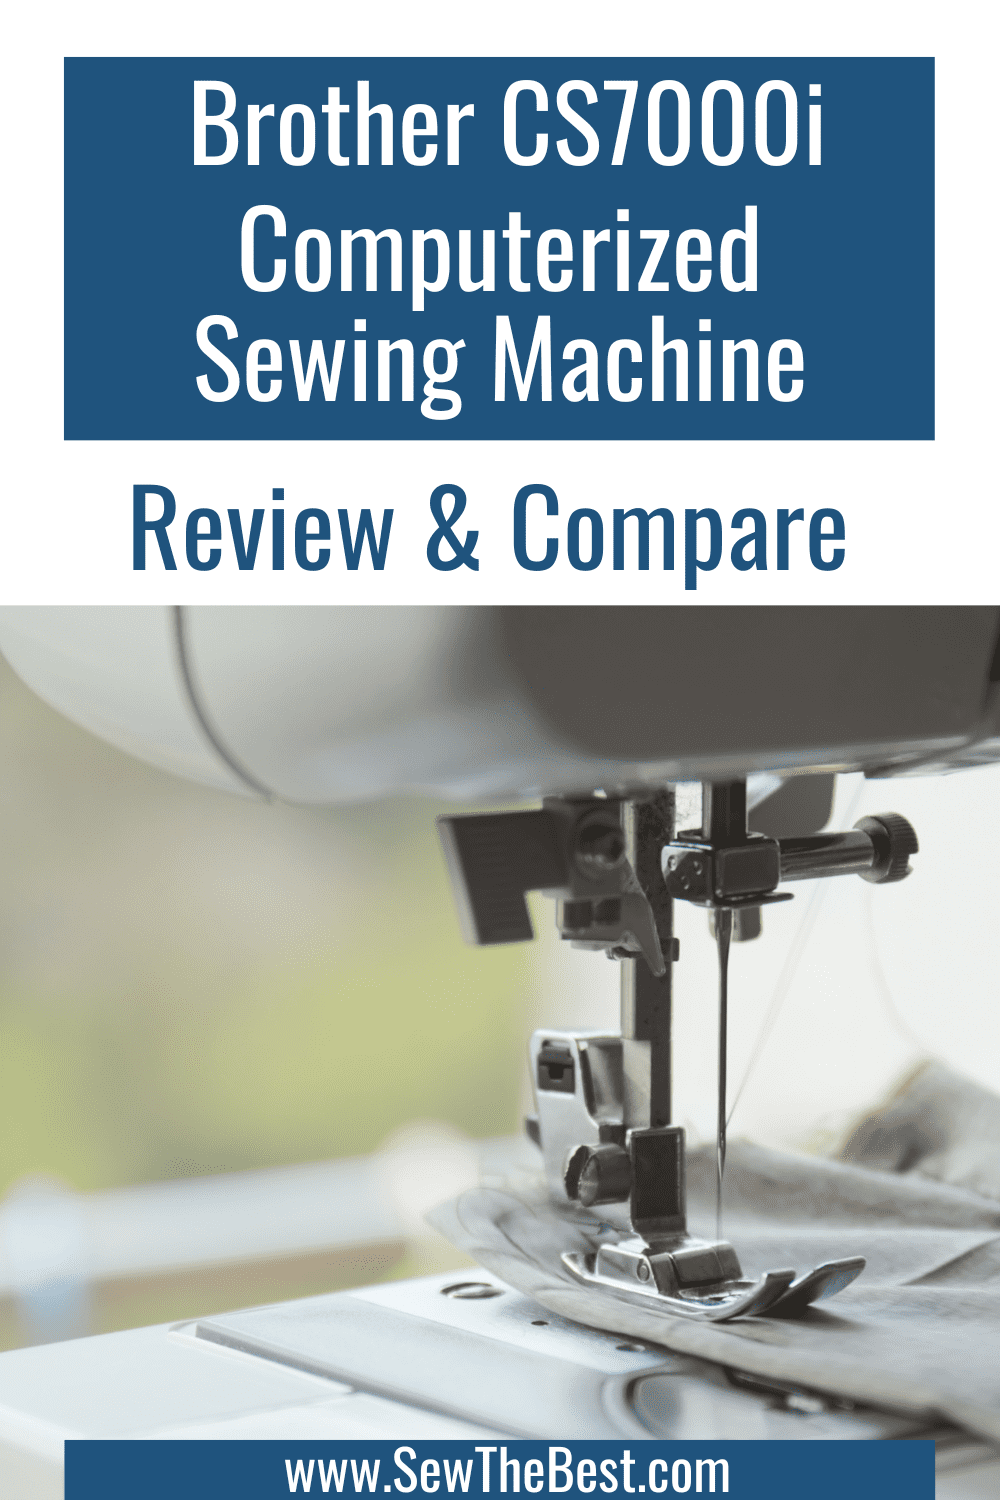 Brother CS7000i Computerized Sewing Machine Review & Compare. Picture of sewing machine head follows.